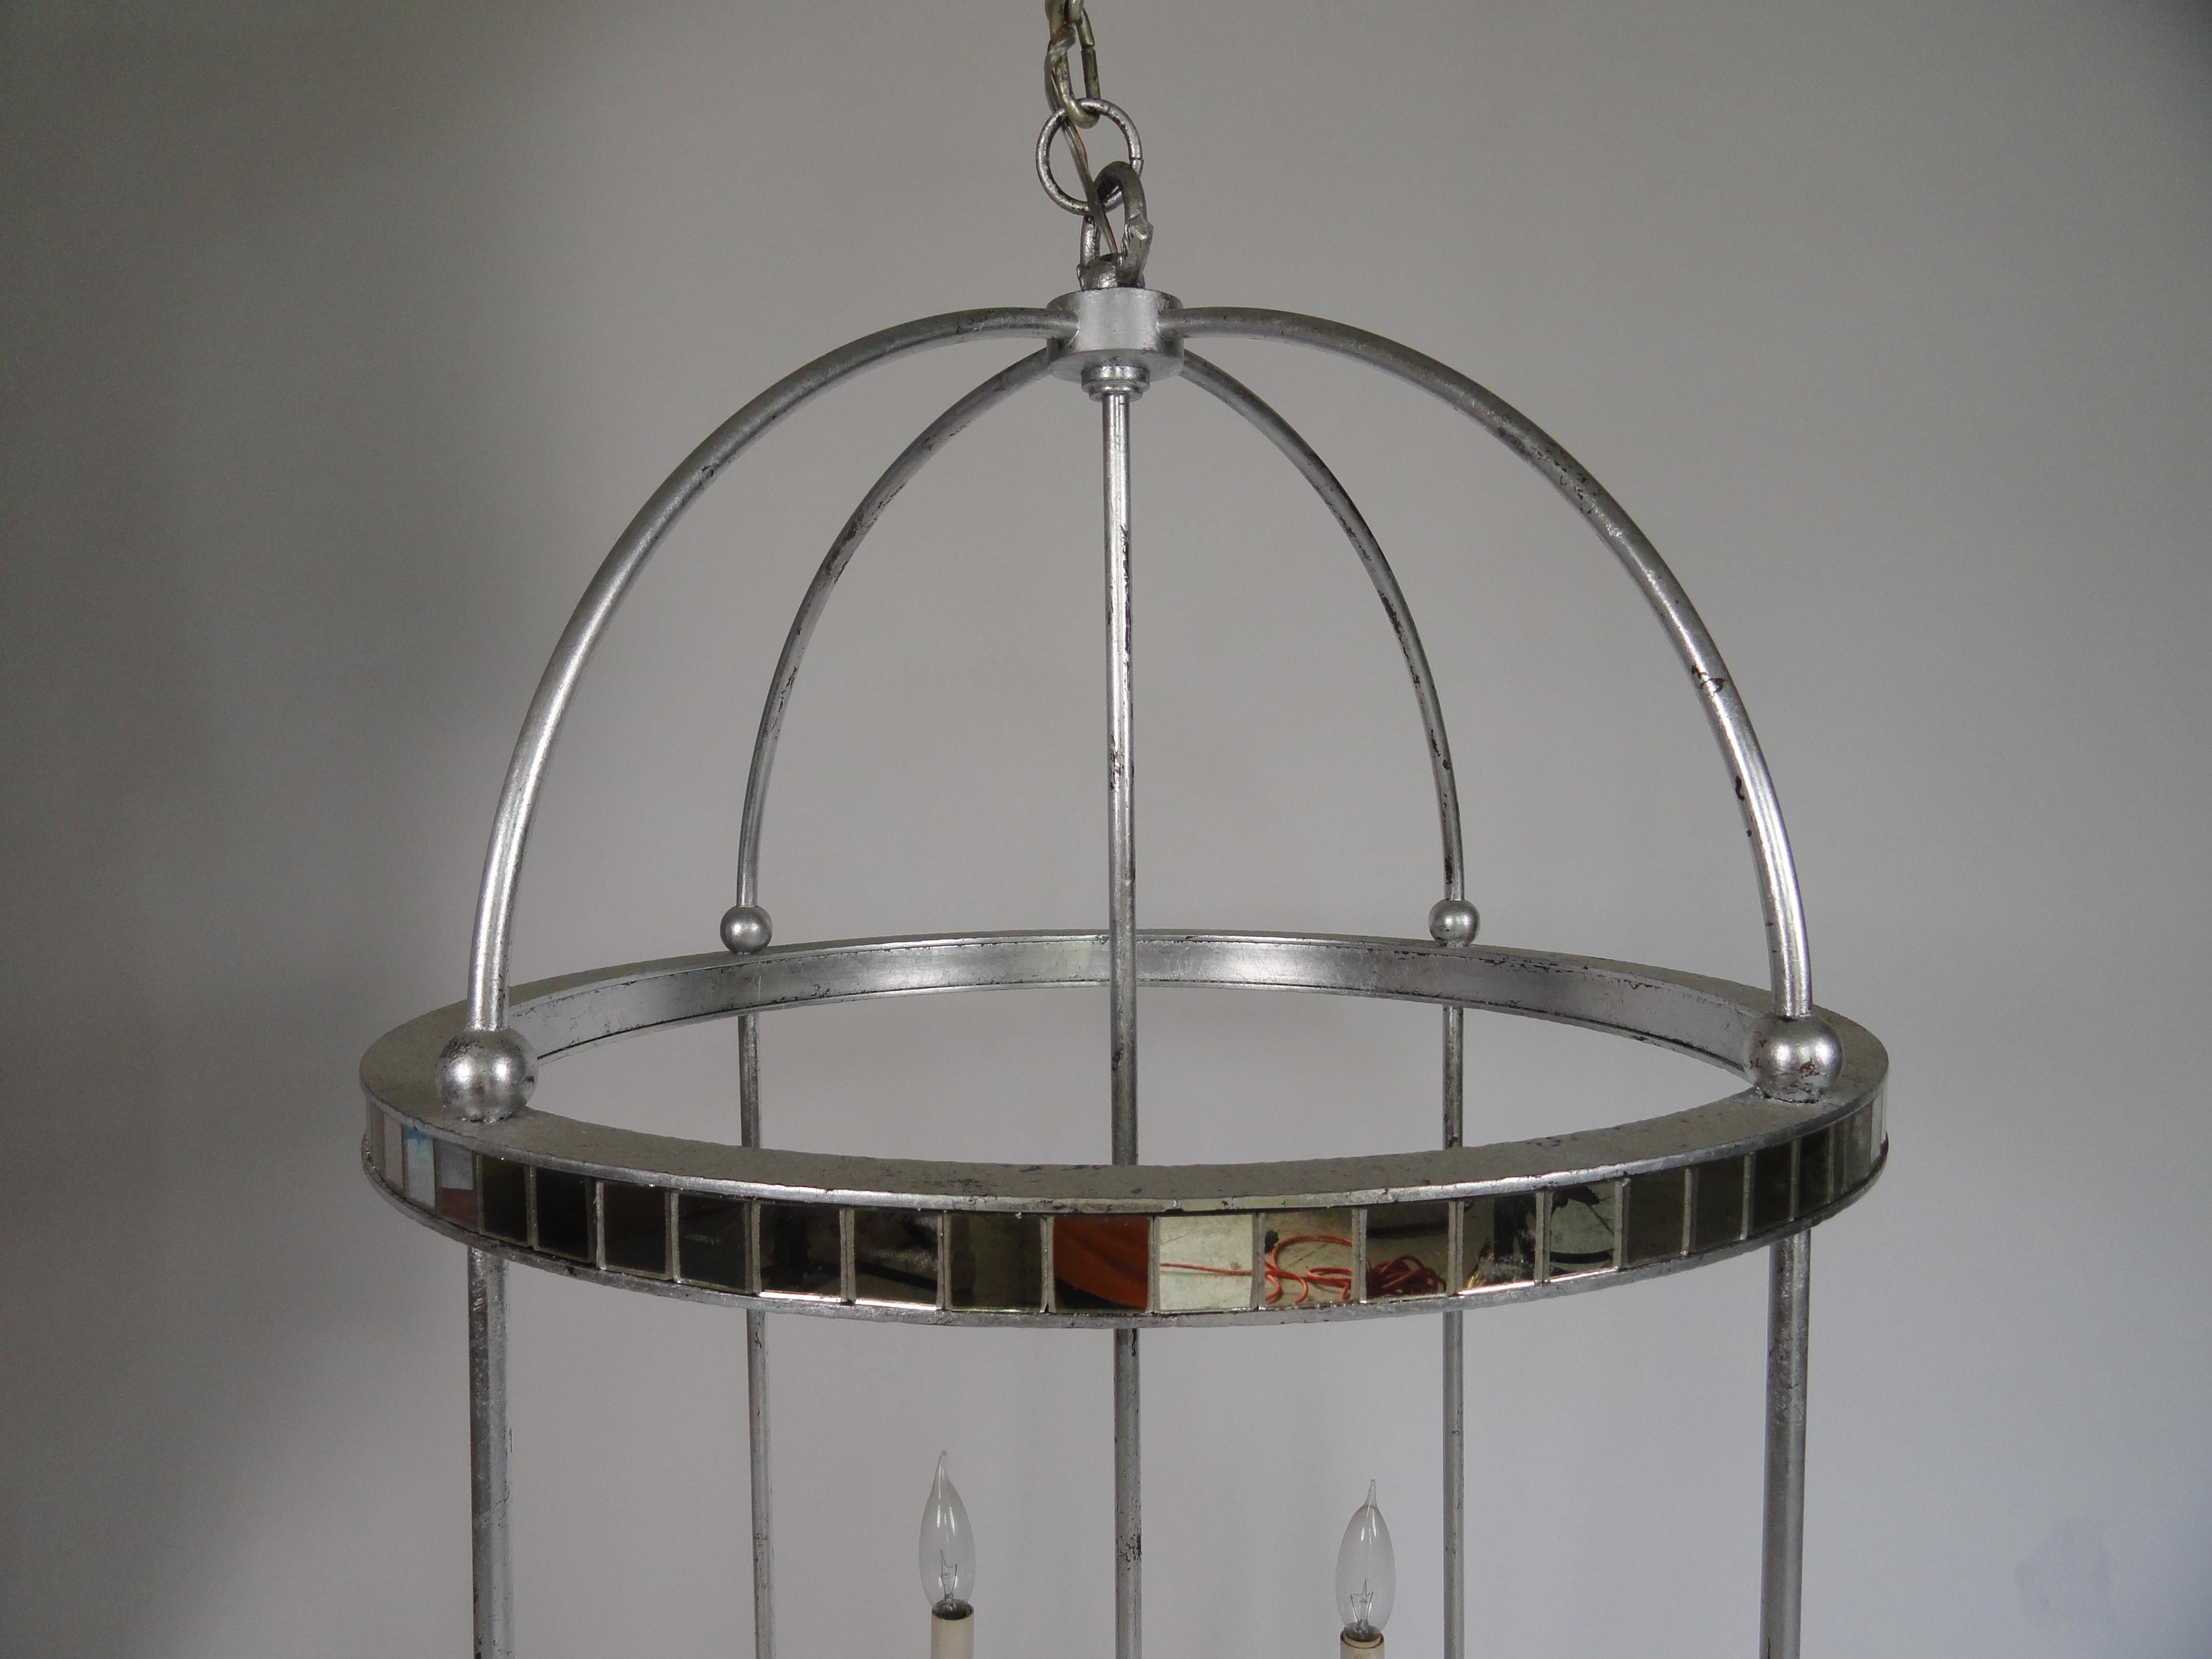 Late 20th century metal and mirror four-light chandelier in silver-leaf finish.
46